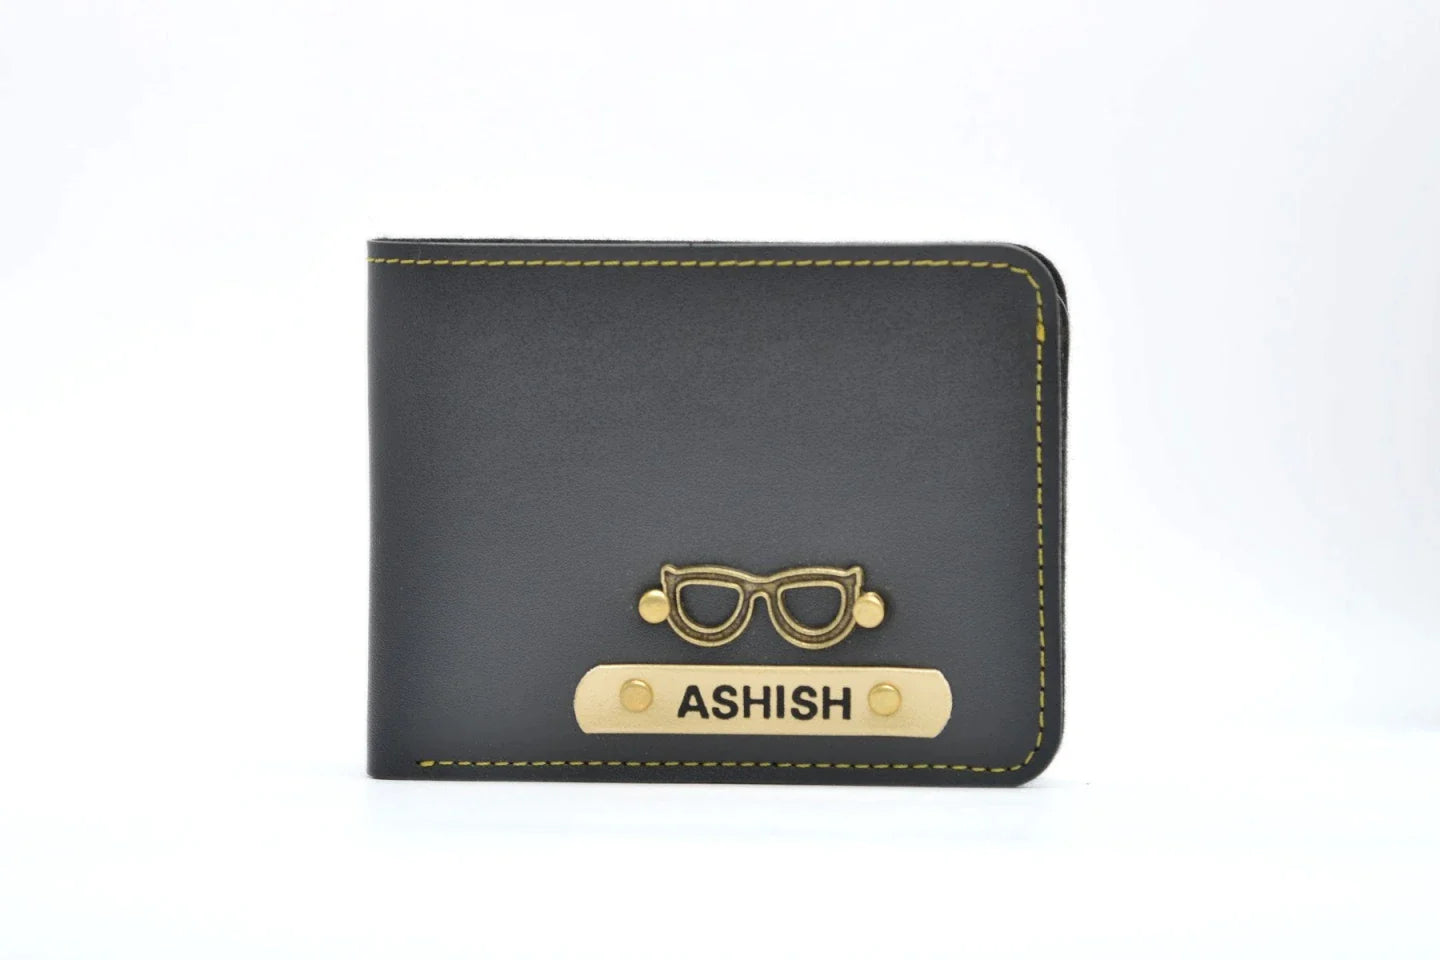 This fantastic, trending, top notch-quality and light-on-pocket imported wallet is the perfect fit for every occasion, trip, travel tours and more.